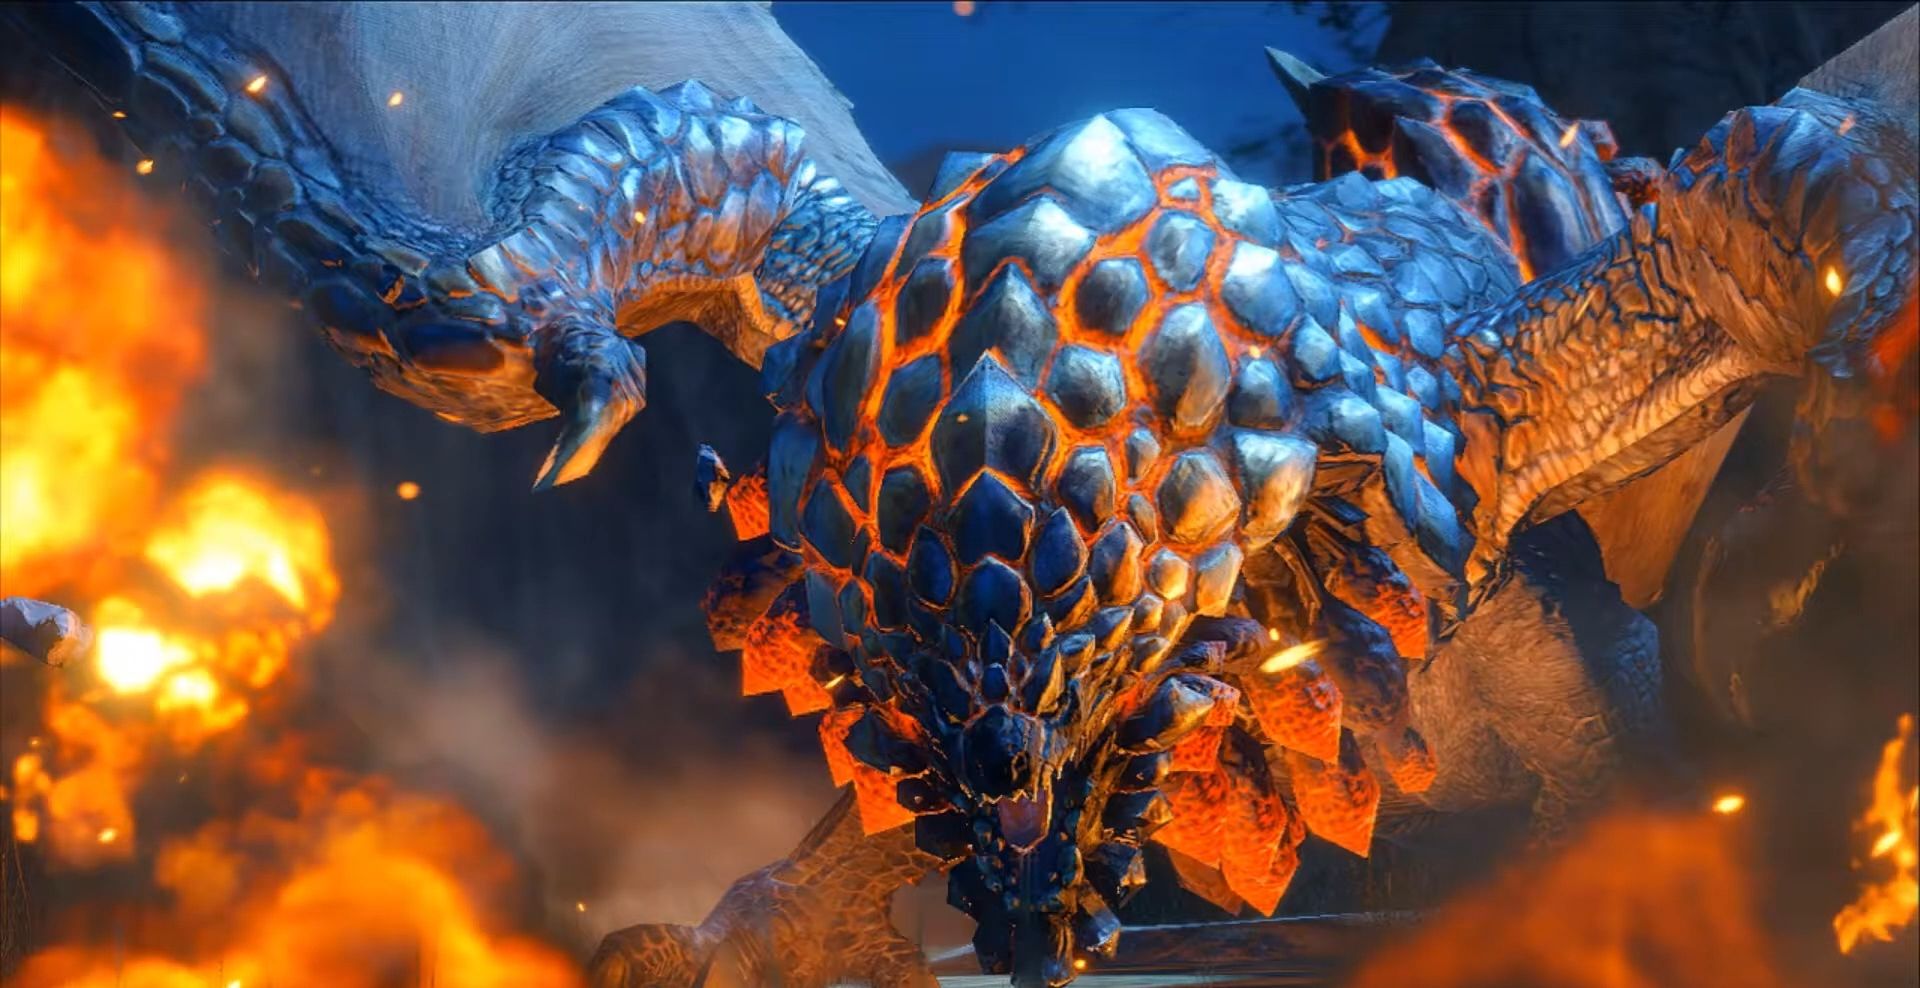 Bazelgeuse in Monster Hunter Rise. A heavily armored wyvern with round scales on its neck glowing red hot. It is surrounded by explosions.